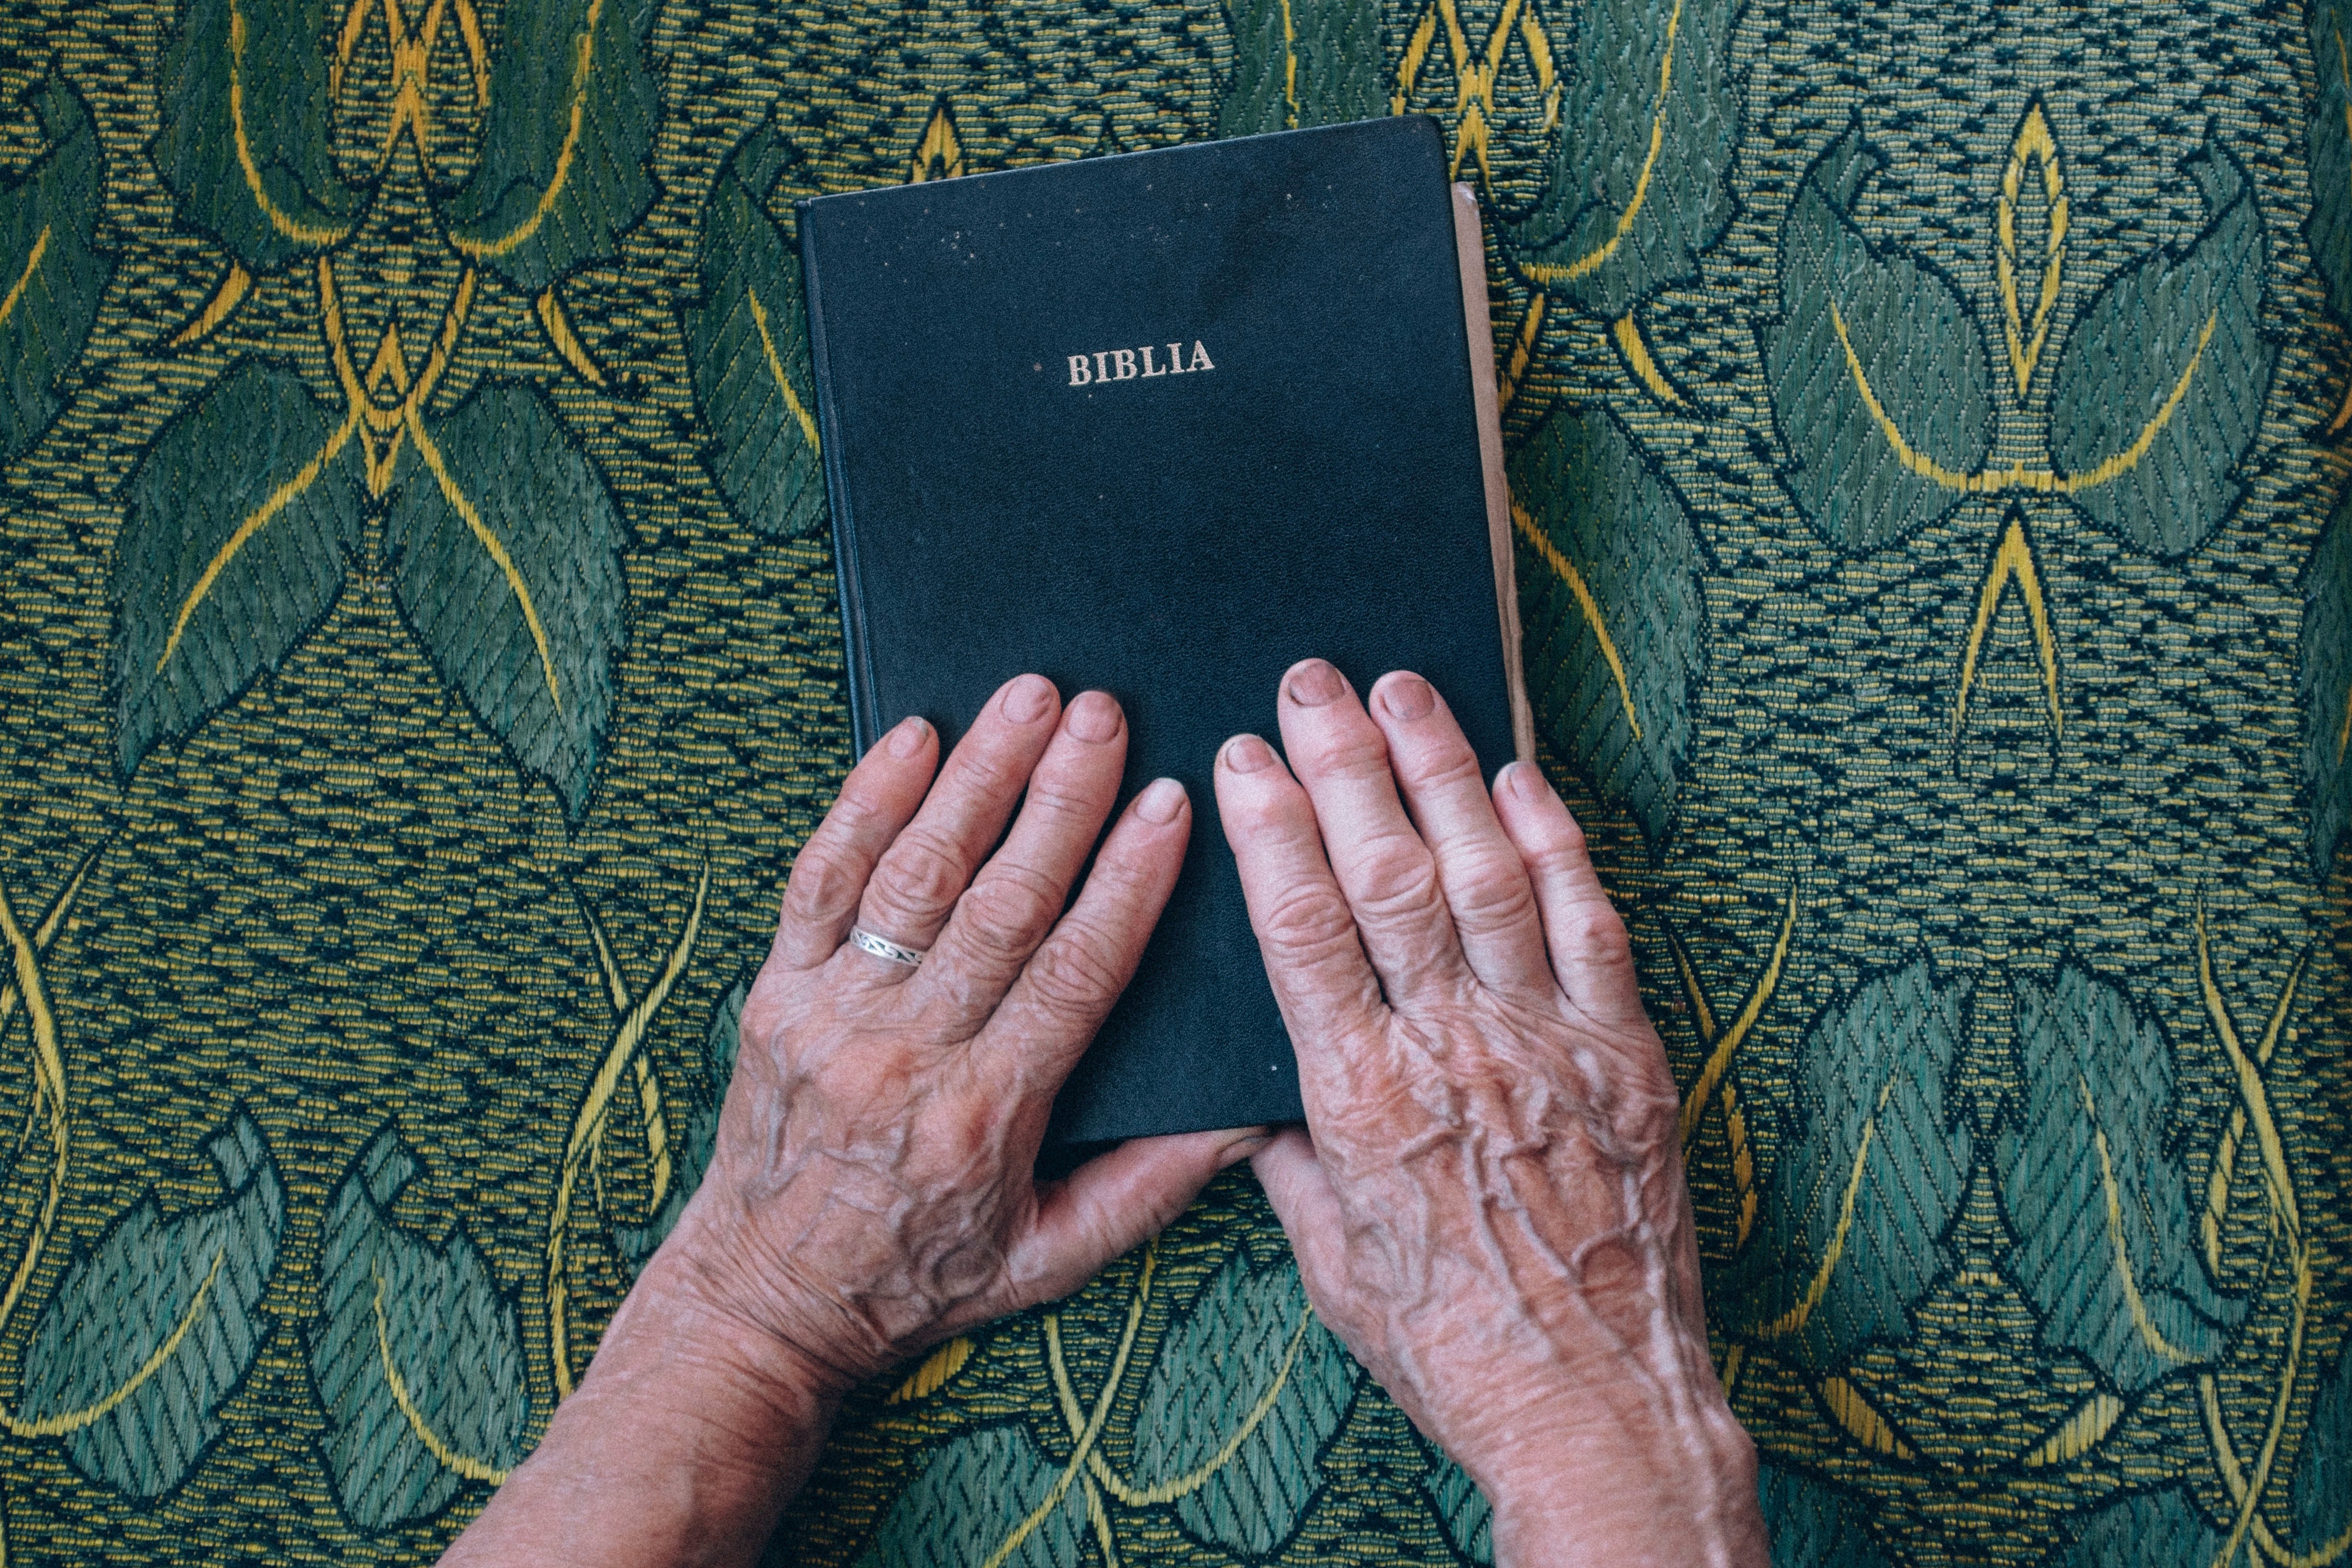 Bobby got his father's old Bible. | Source: Unsplash